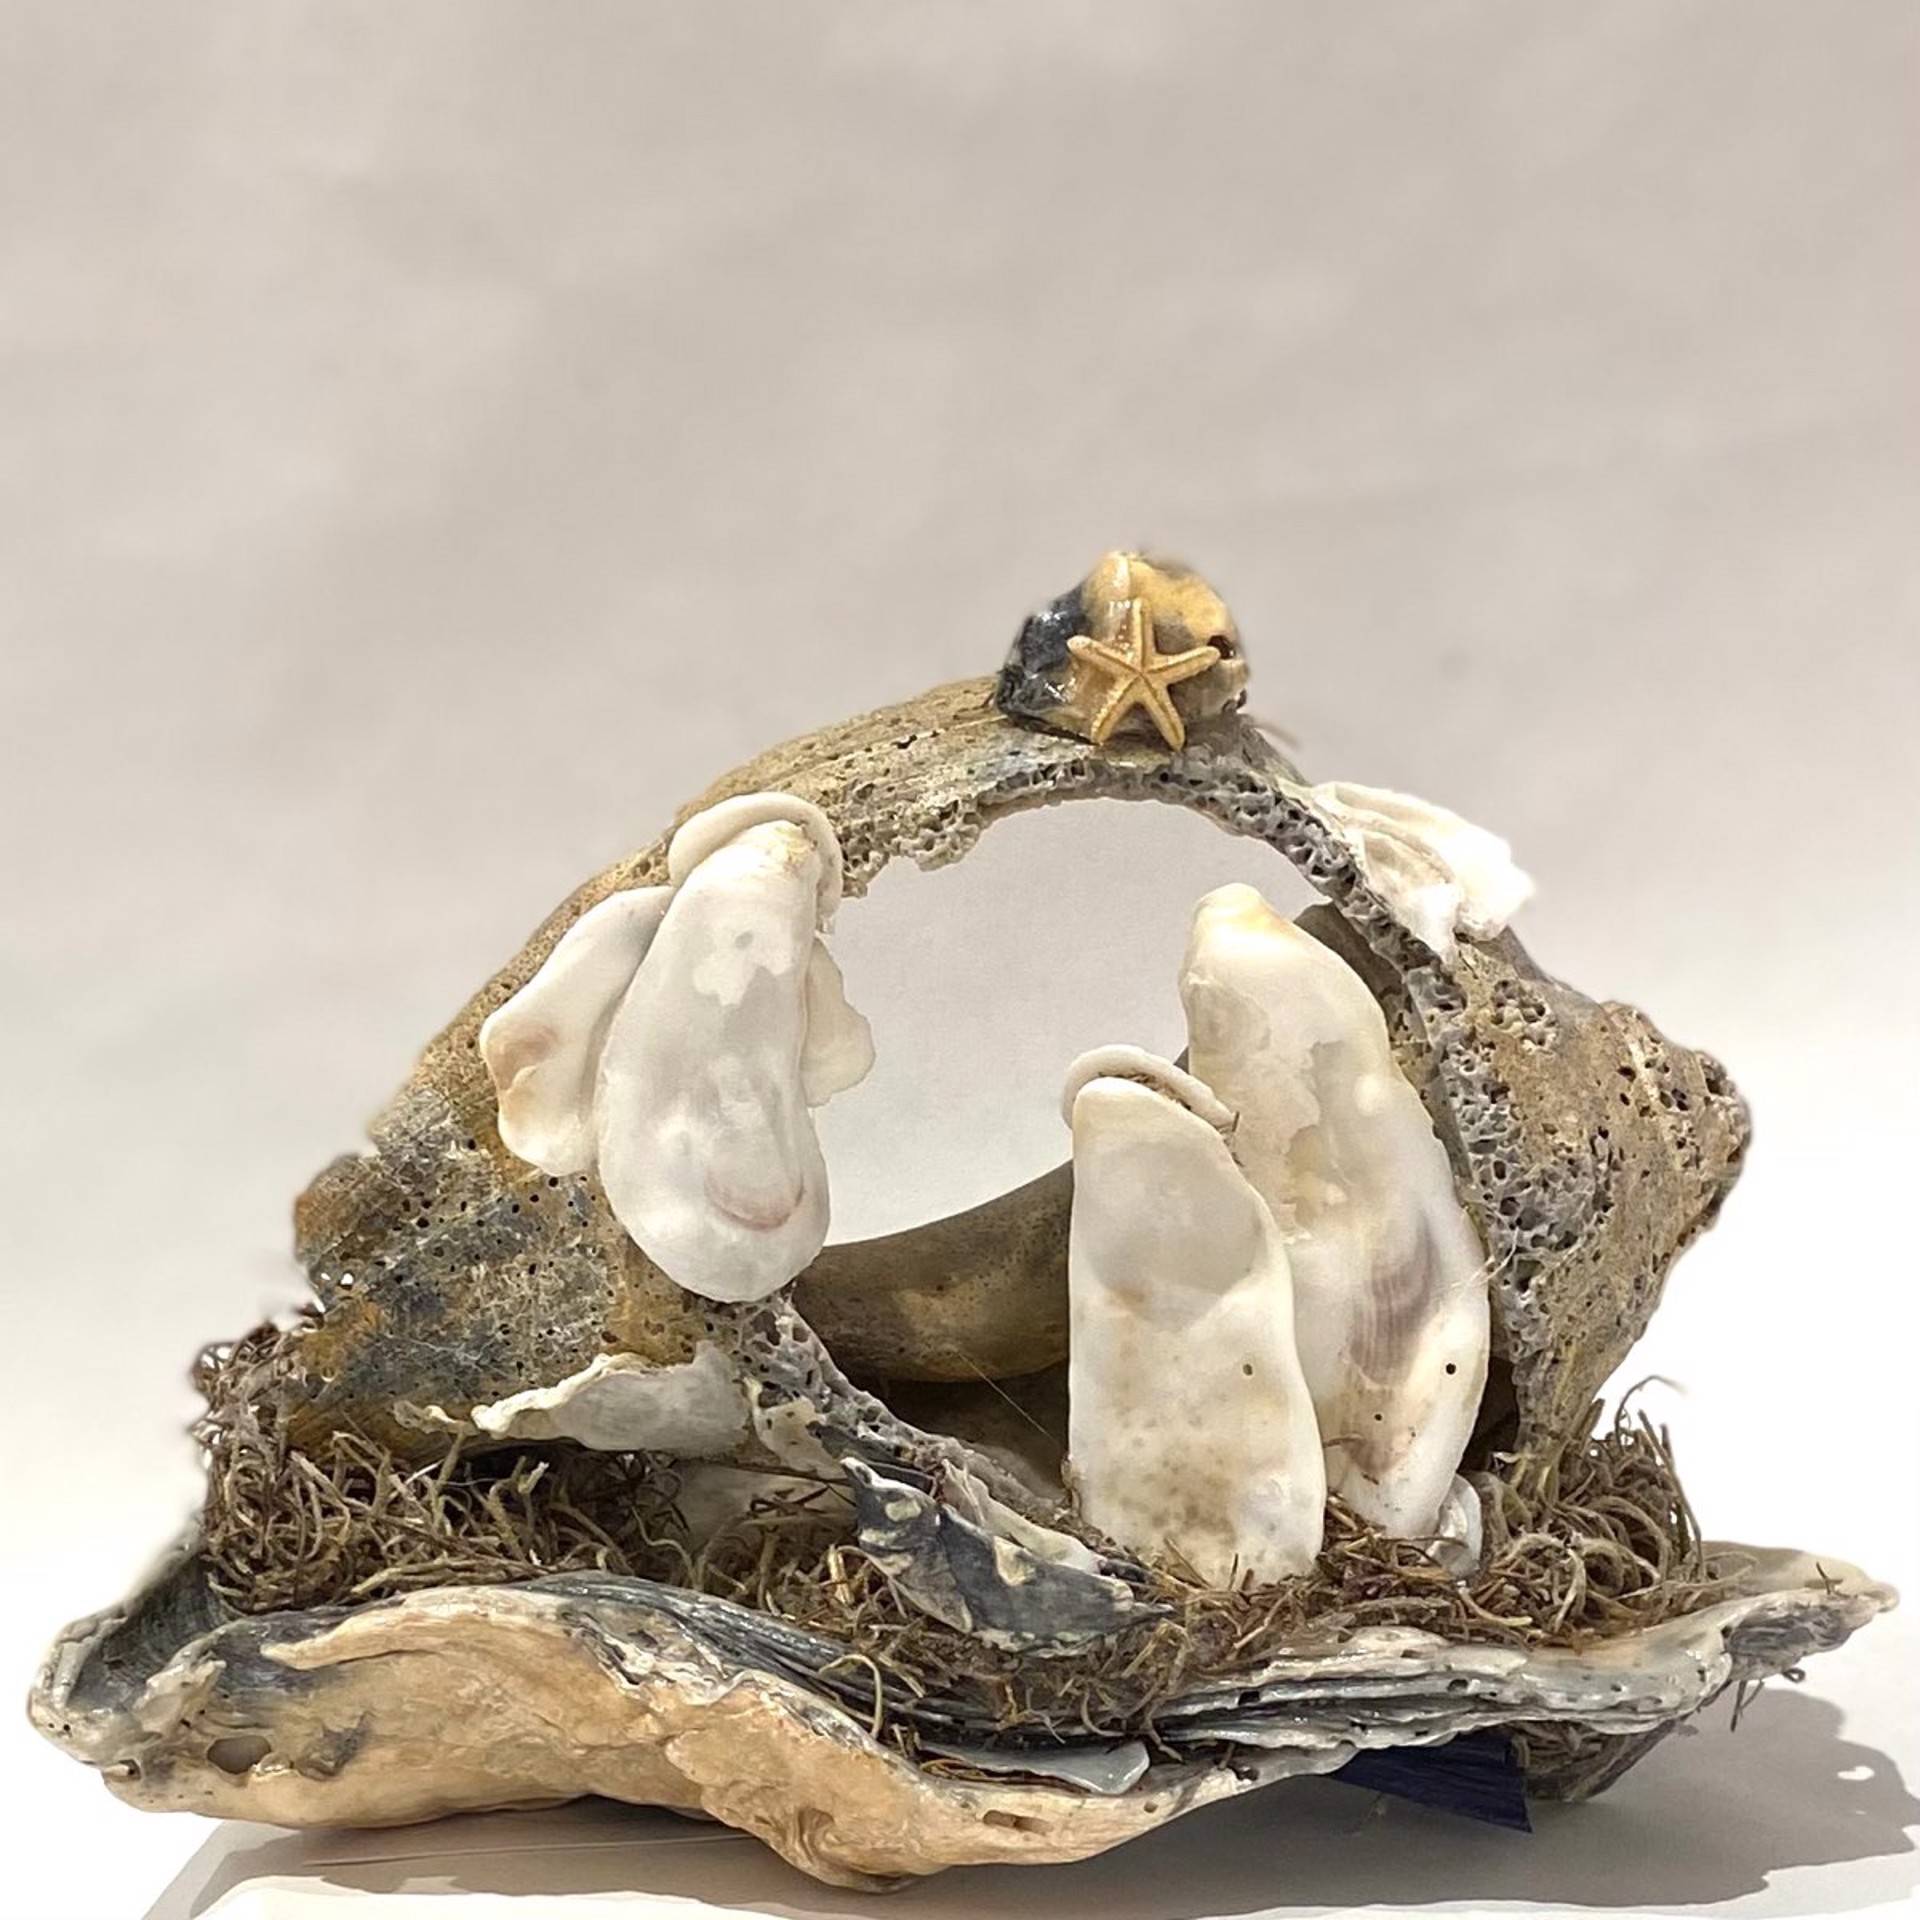 CN22-39 Crèche from the Sea -Whelk On Large Grey Oyster Shell by Chris Nietert